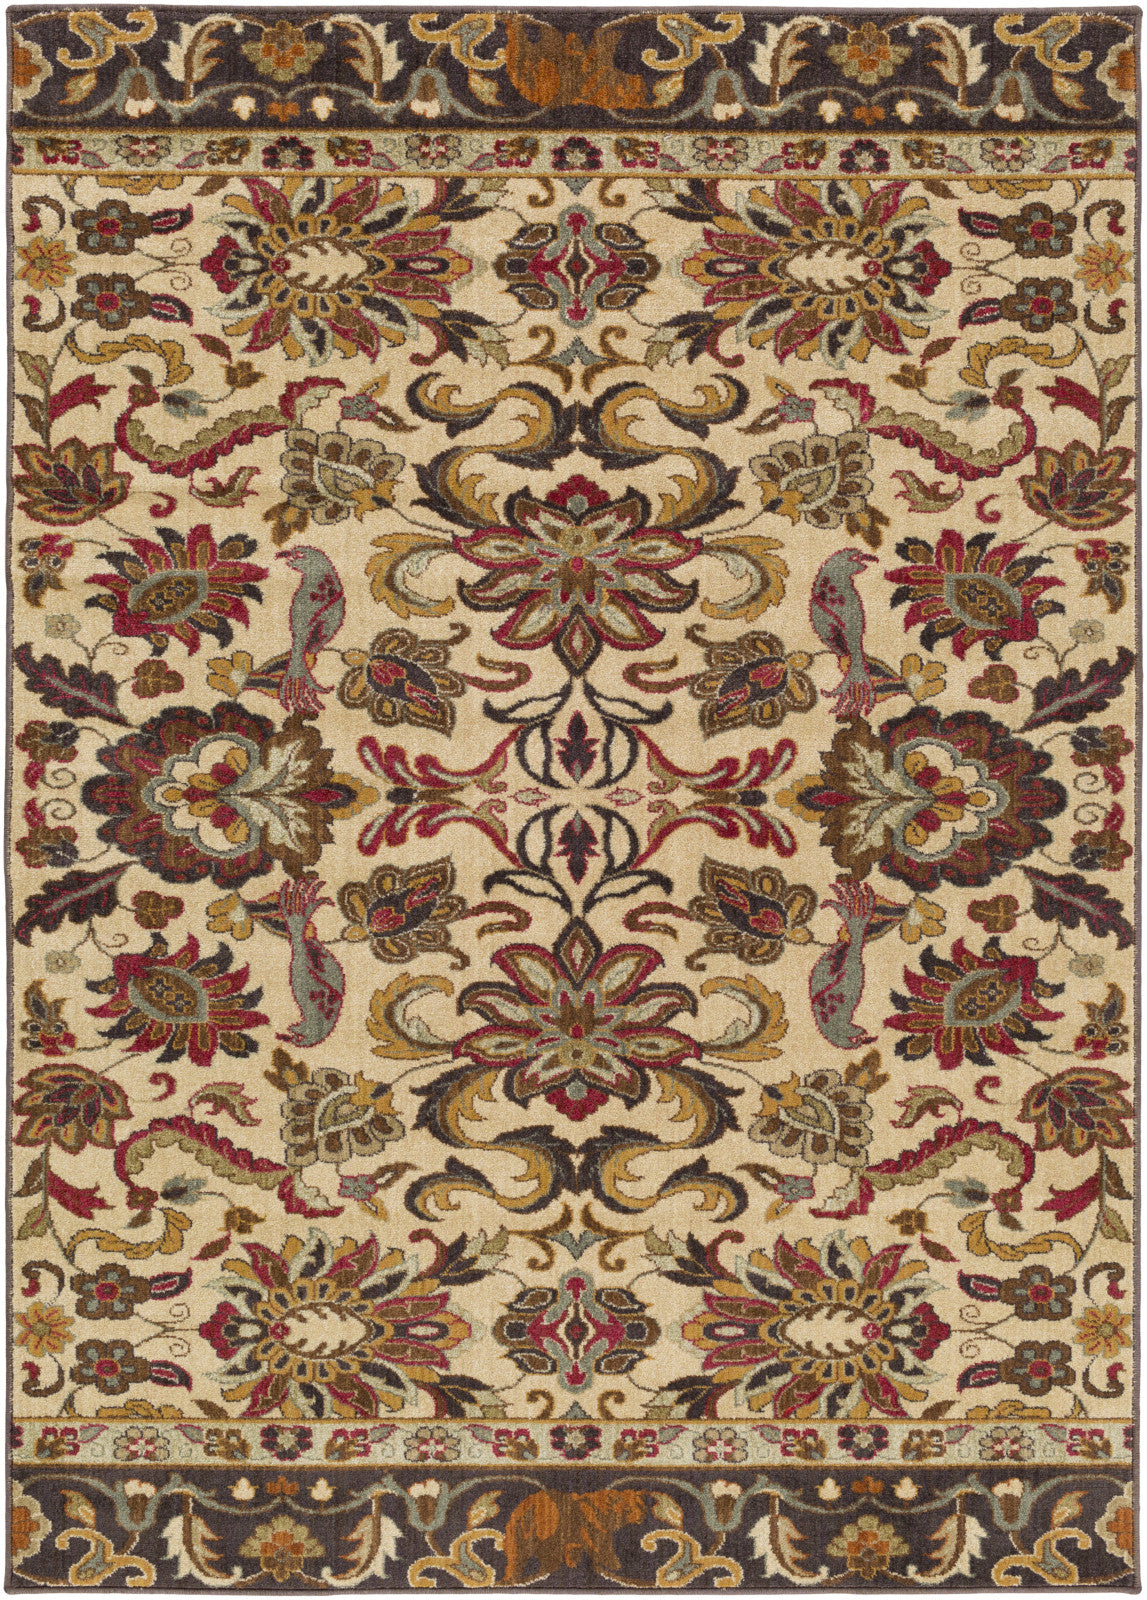 Surya Willow Lodge WLL-1005 White Area Rug by Mossy Oak